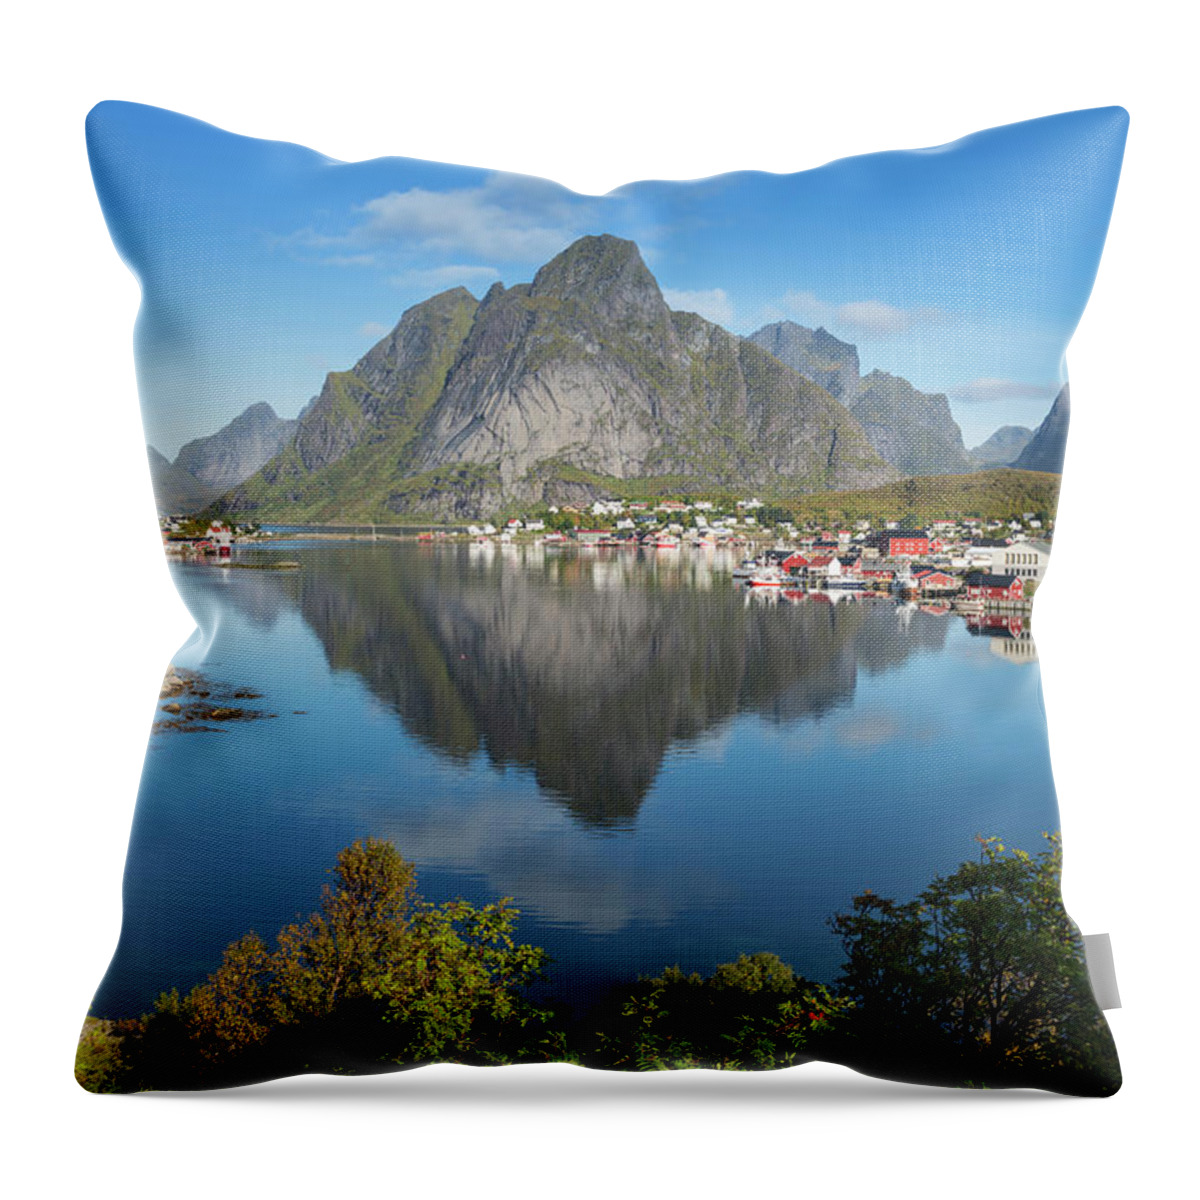 Village Throw Pillow featuring the photograph Reflection Of Olstind Mountain Peak by Cody Duncan